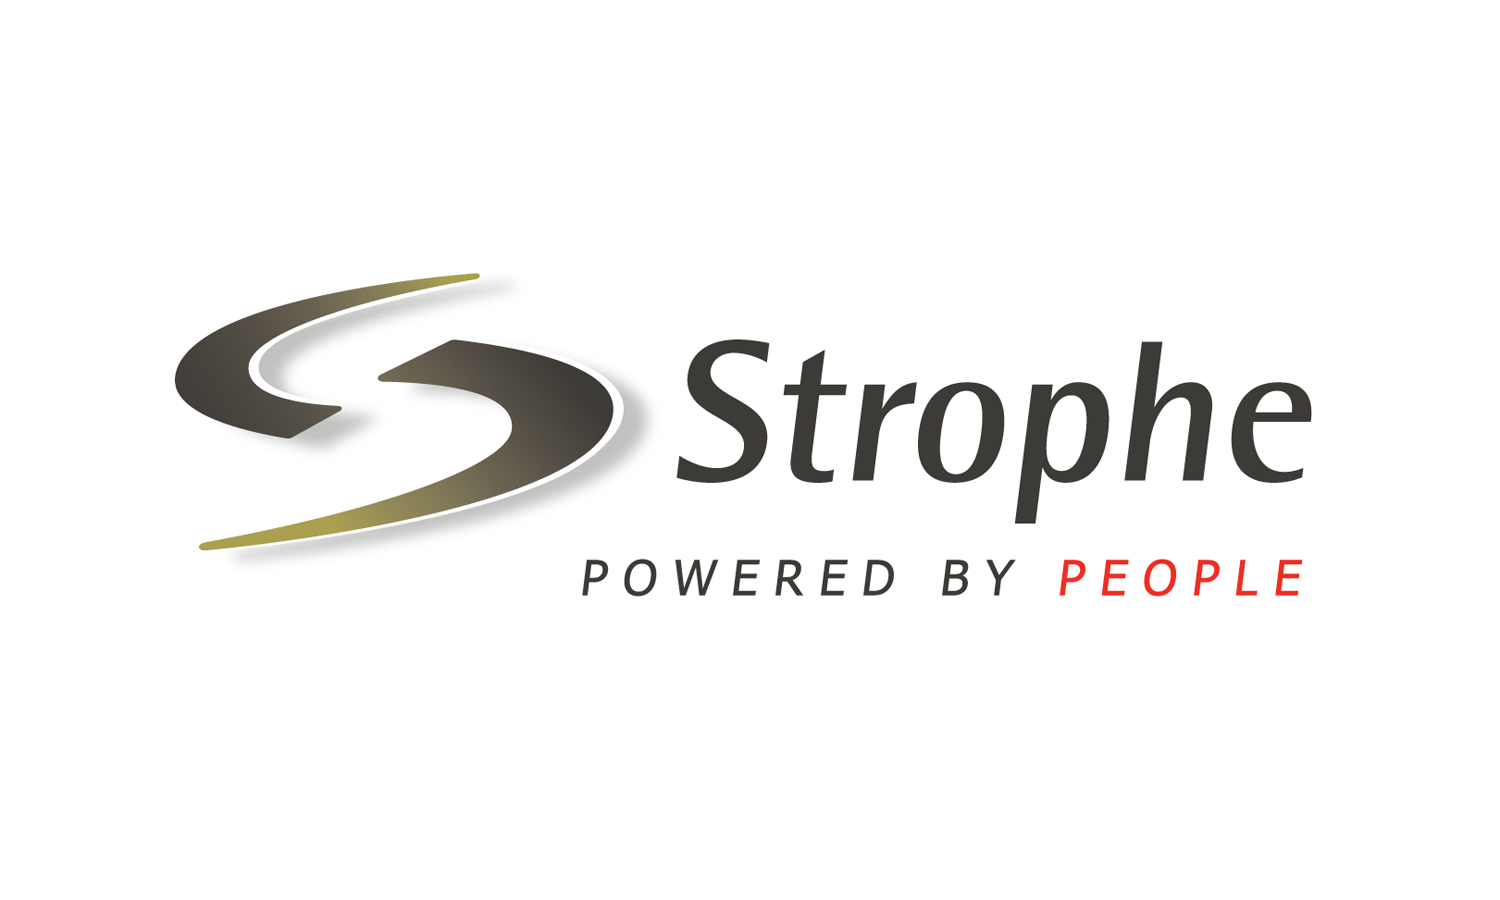 strophes defined